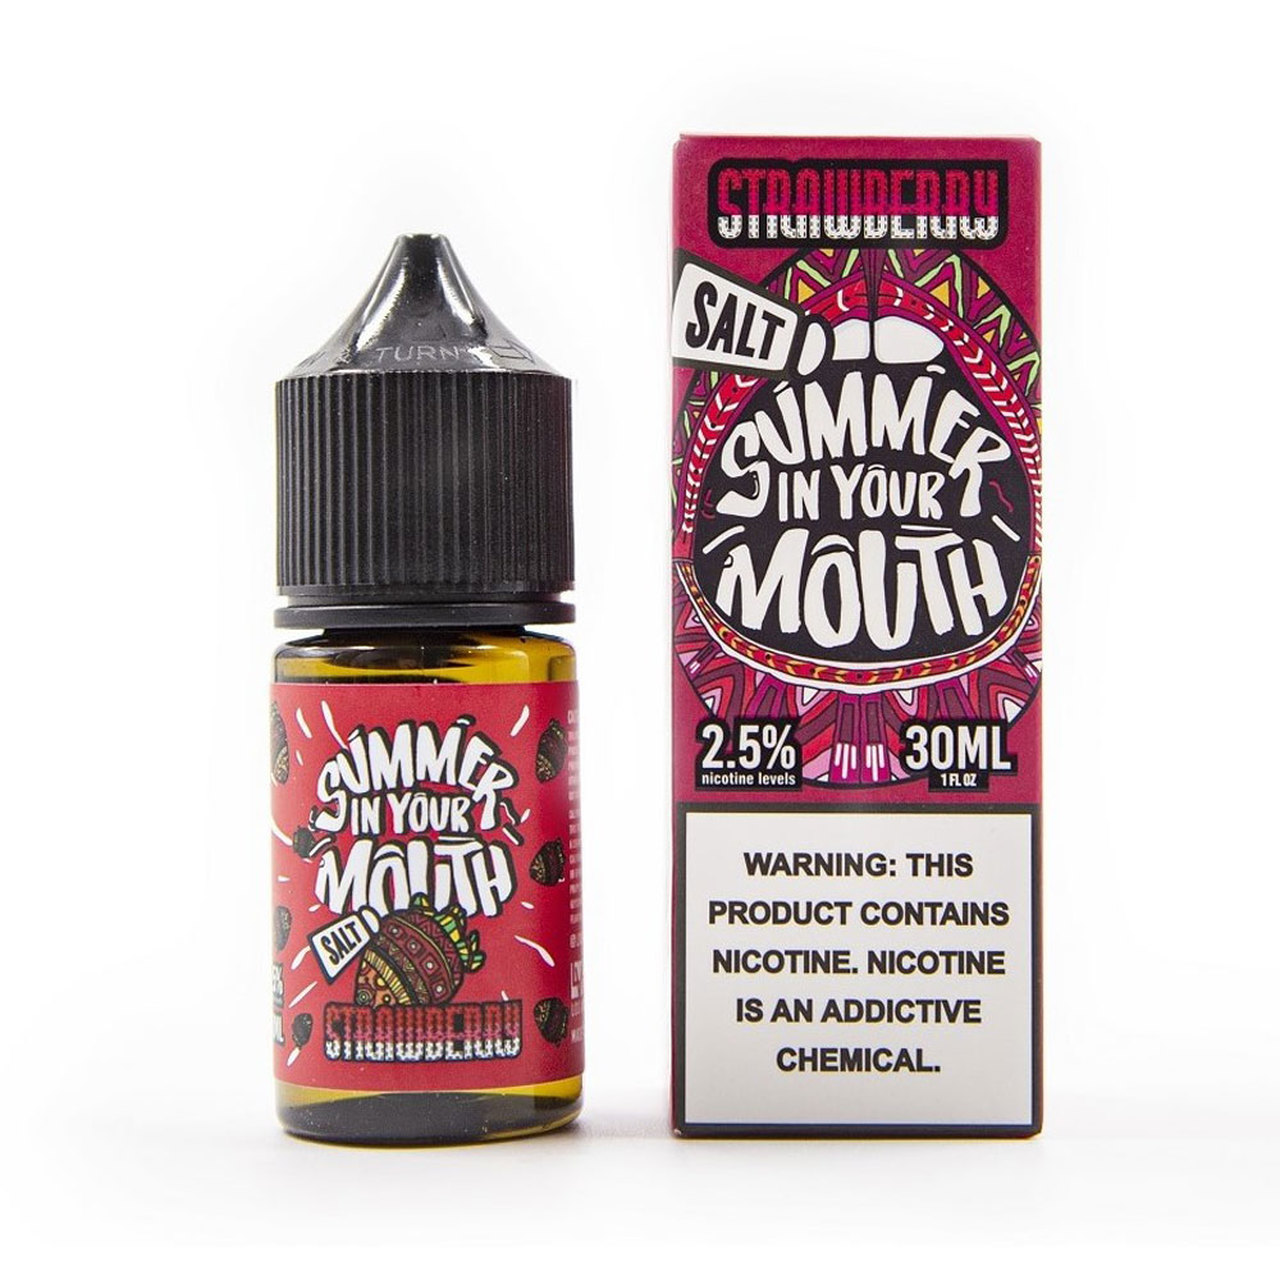 SUMMER IN YOUR MOUTH SALTS ICED STRAWBERRY 30ML